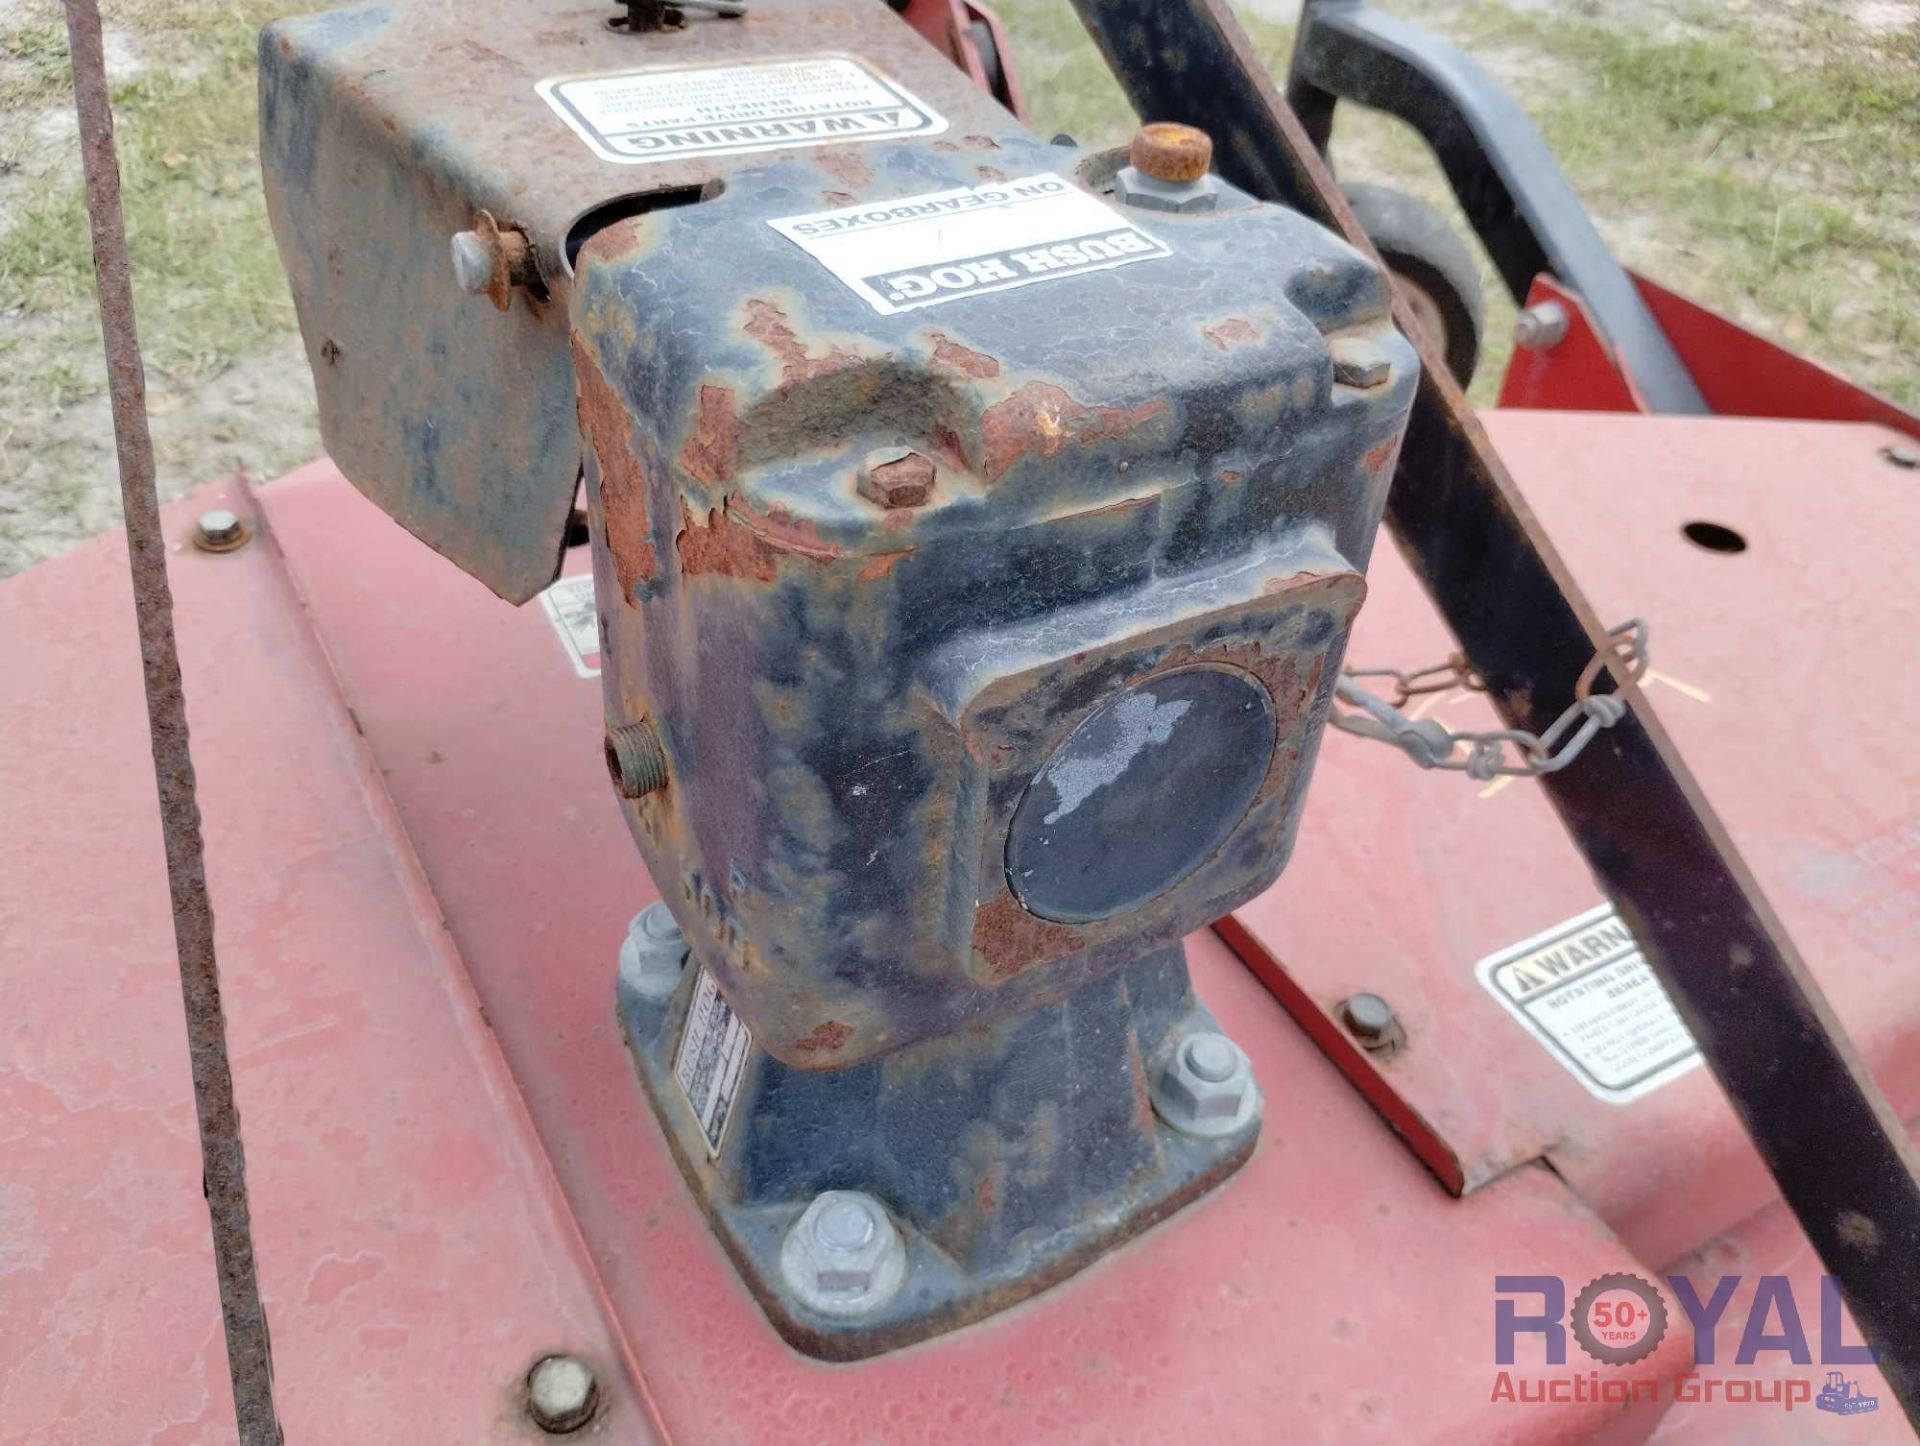 Bush Hog RDTH60 Mower Tractor Attachment - Image 5 of 6